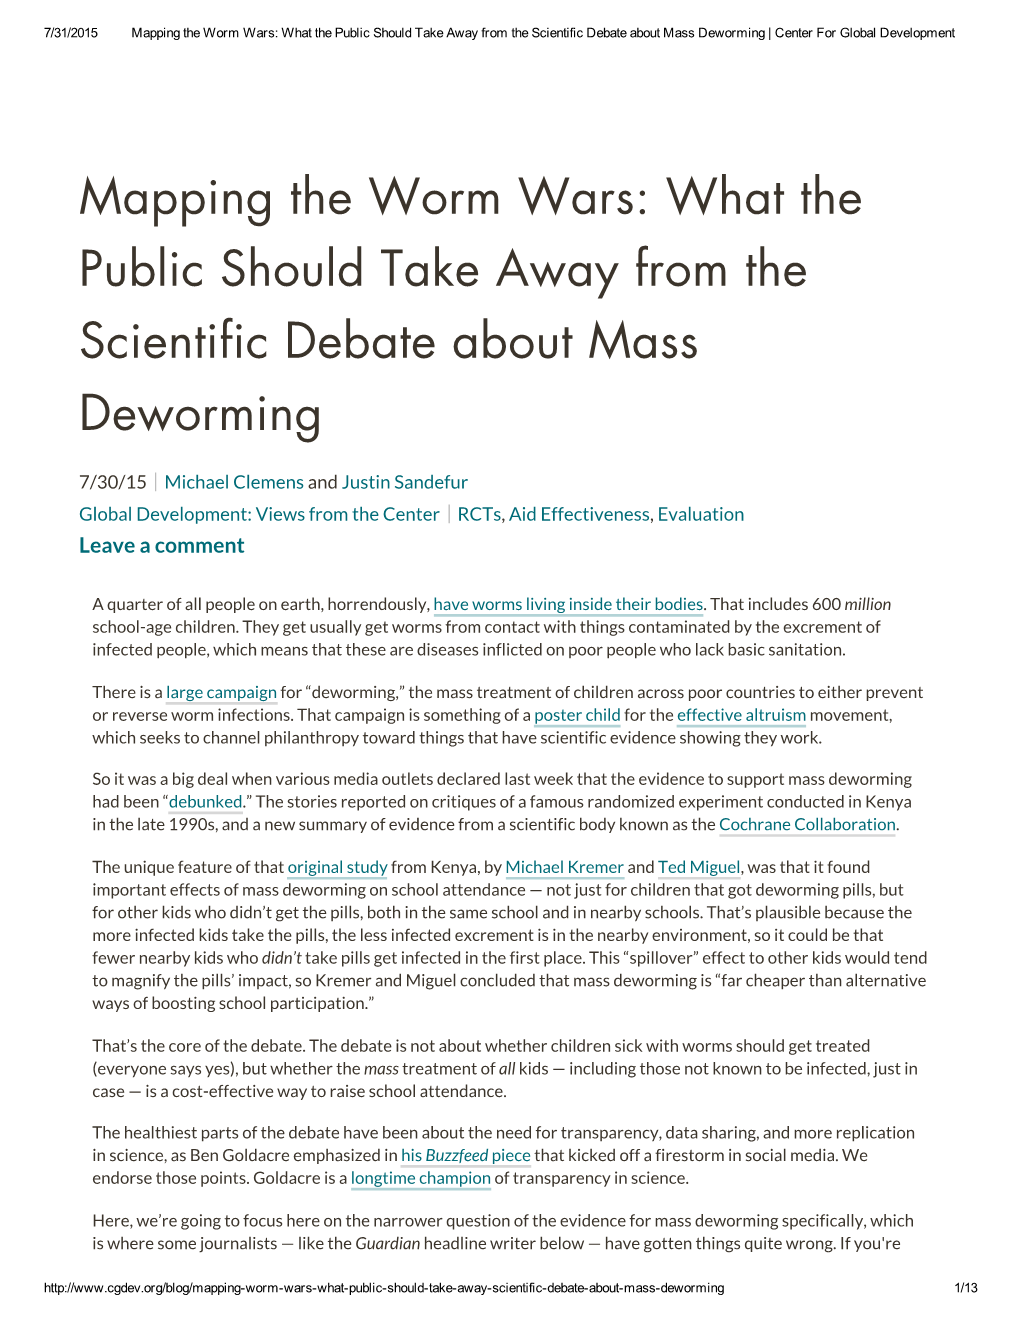 Mapping the Worm Wars: What the Public Should Take Away from the Scientific Debate About Mass Deworming | Center for Global Development